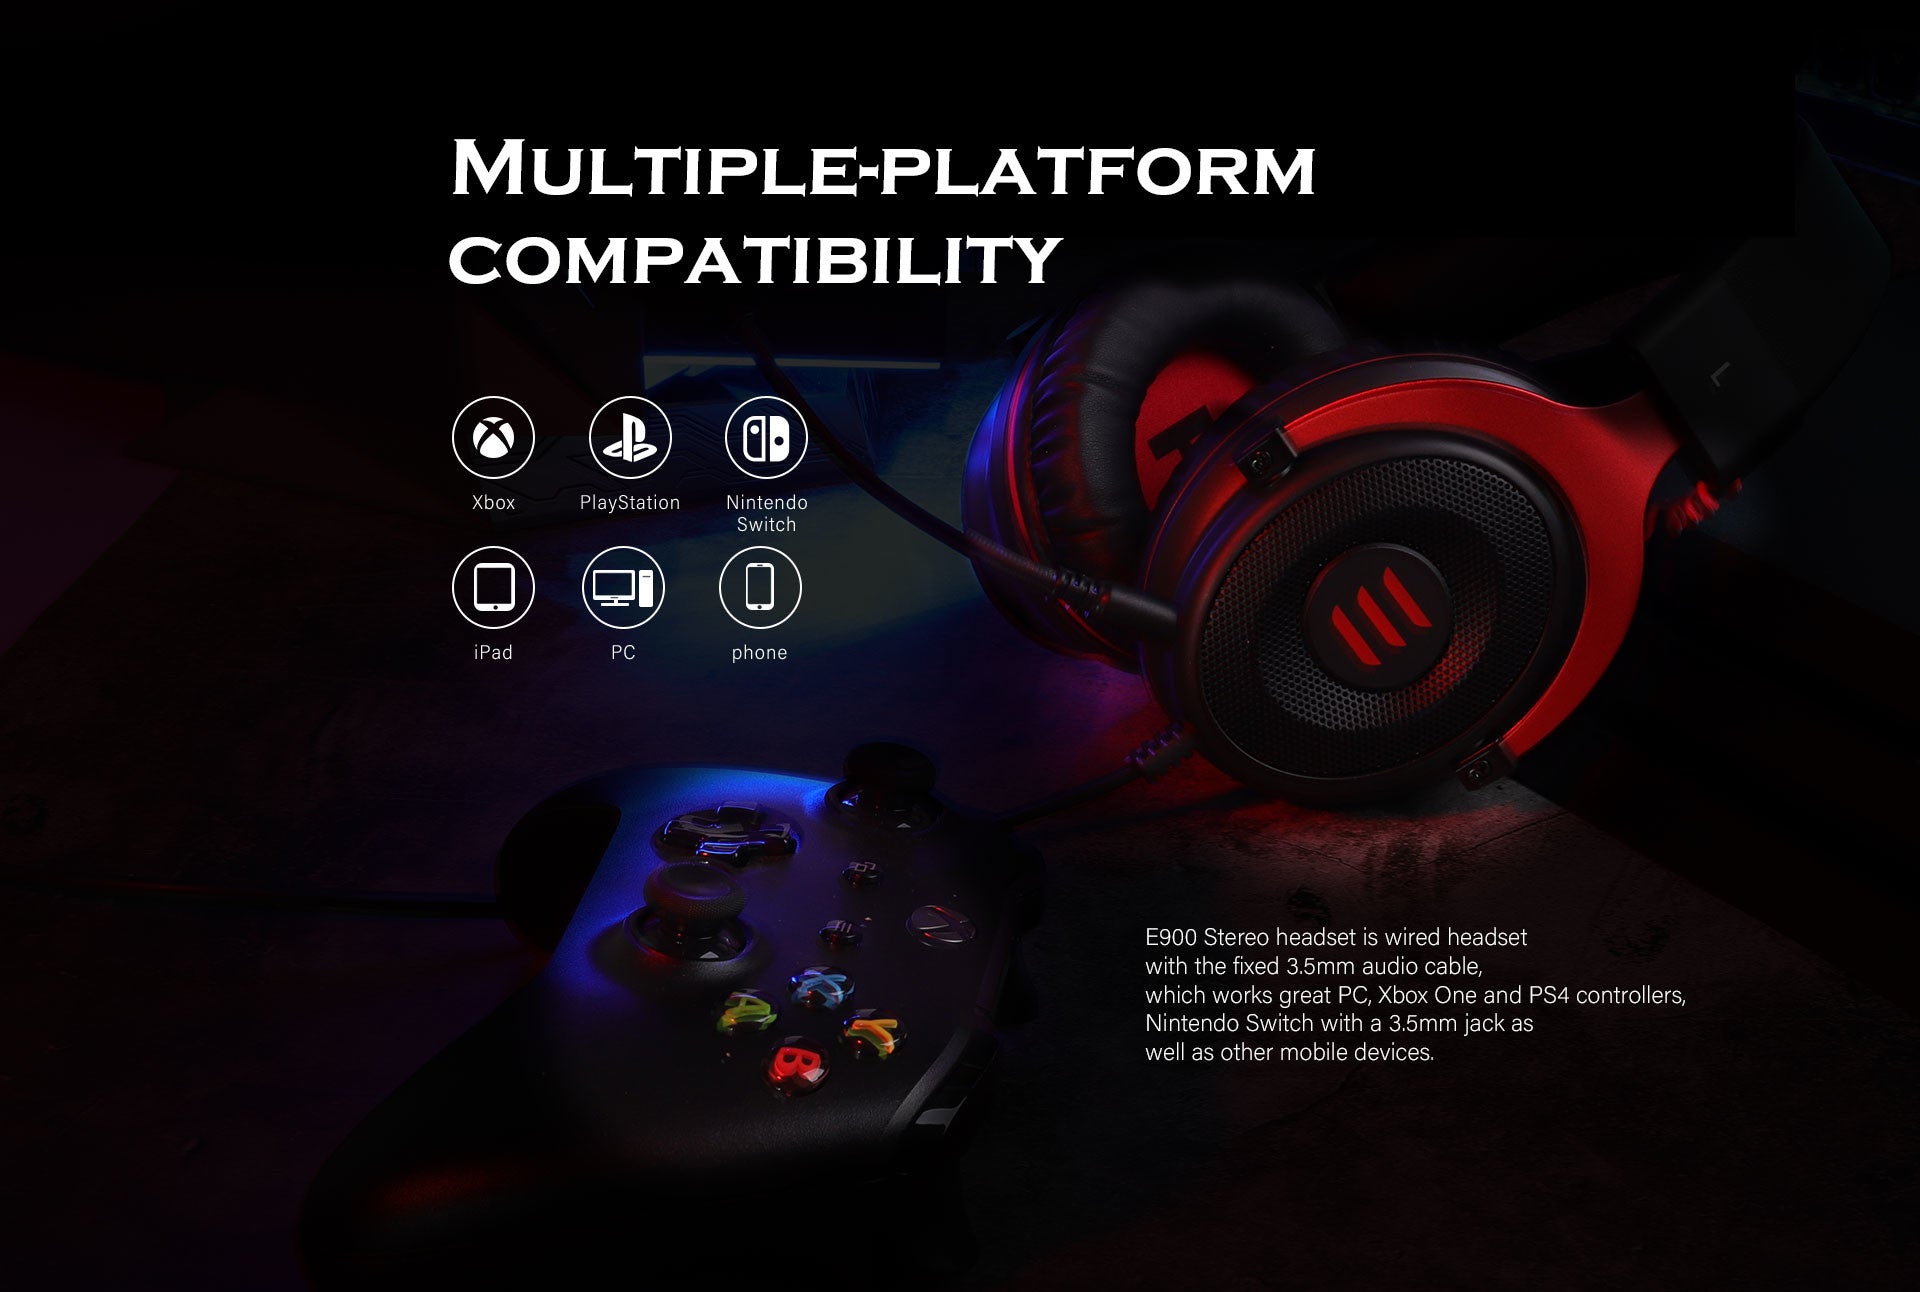 E900 stereo sound gaming headset supports multiple-platform compatibiliy.